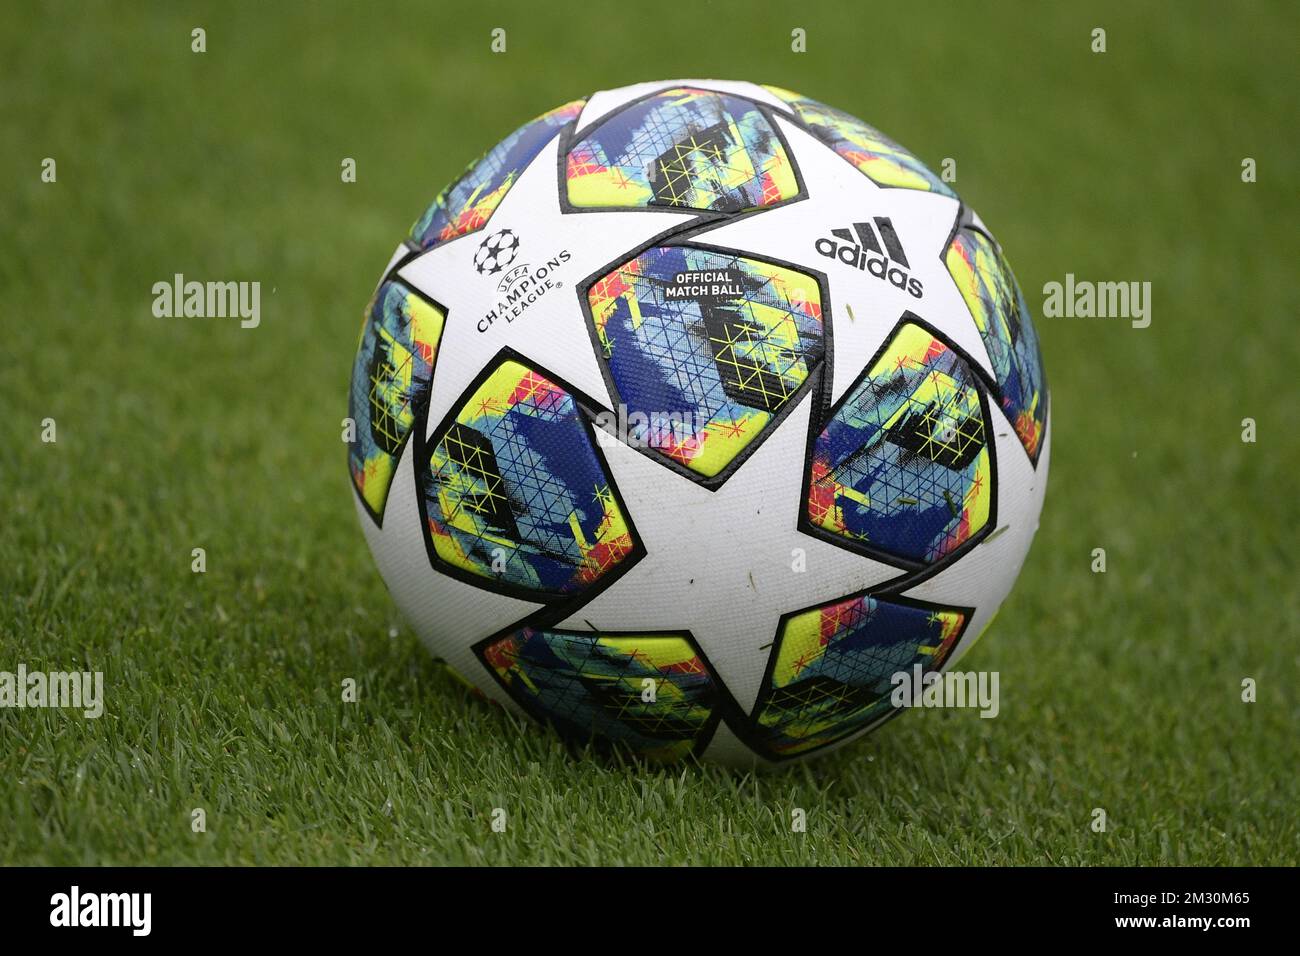 Illustration picture shows the official Adidas Finale 19 Champions League  match ball during a training session of Belgian soccer team RC Genk,  Tuesday 01 October 2019 in Genk, in preparation of Tomorrow's